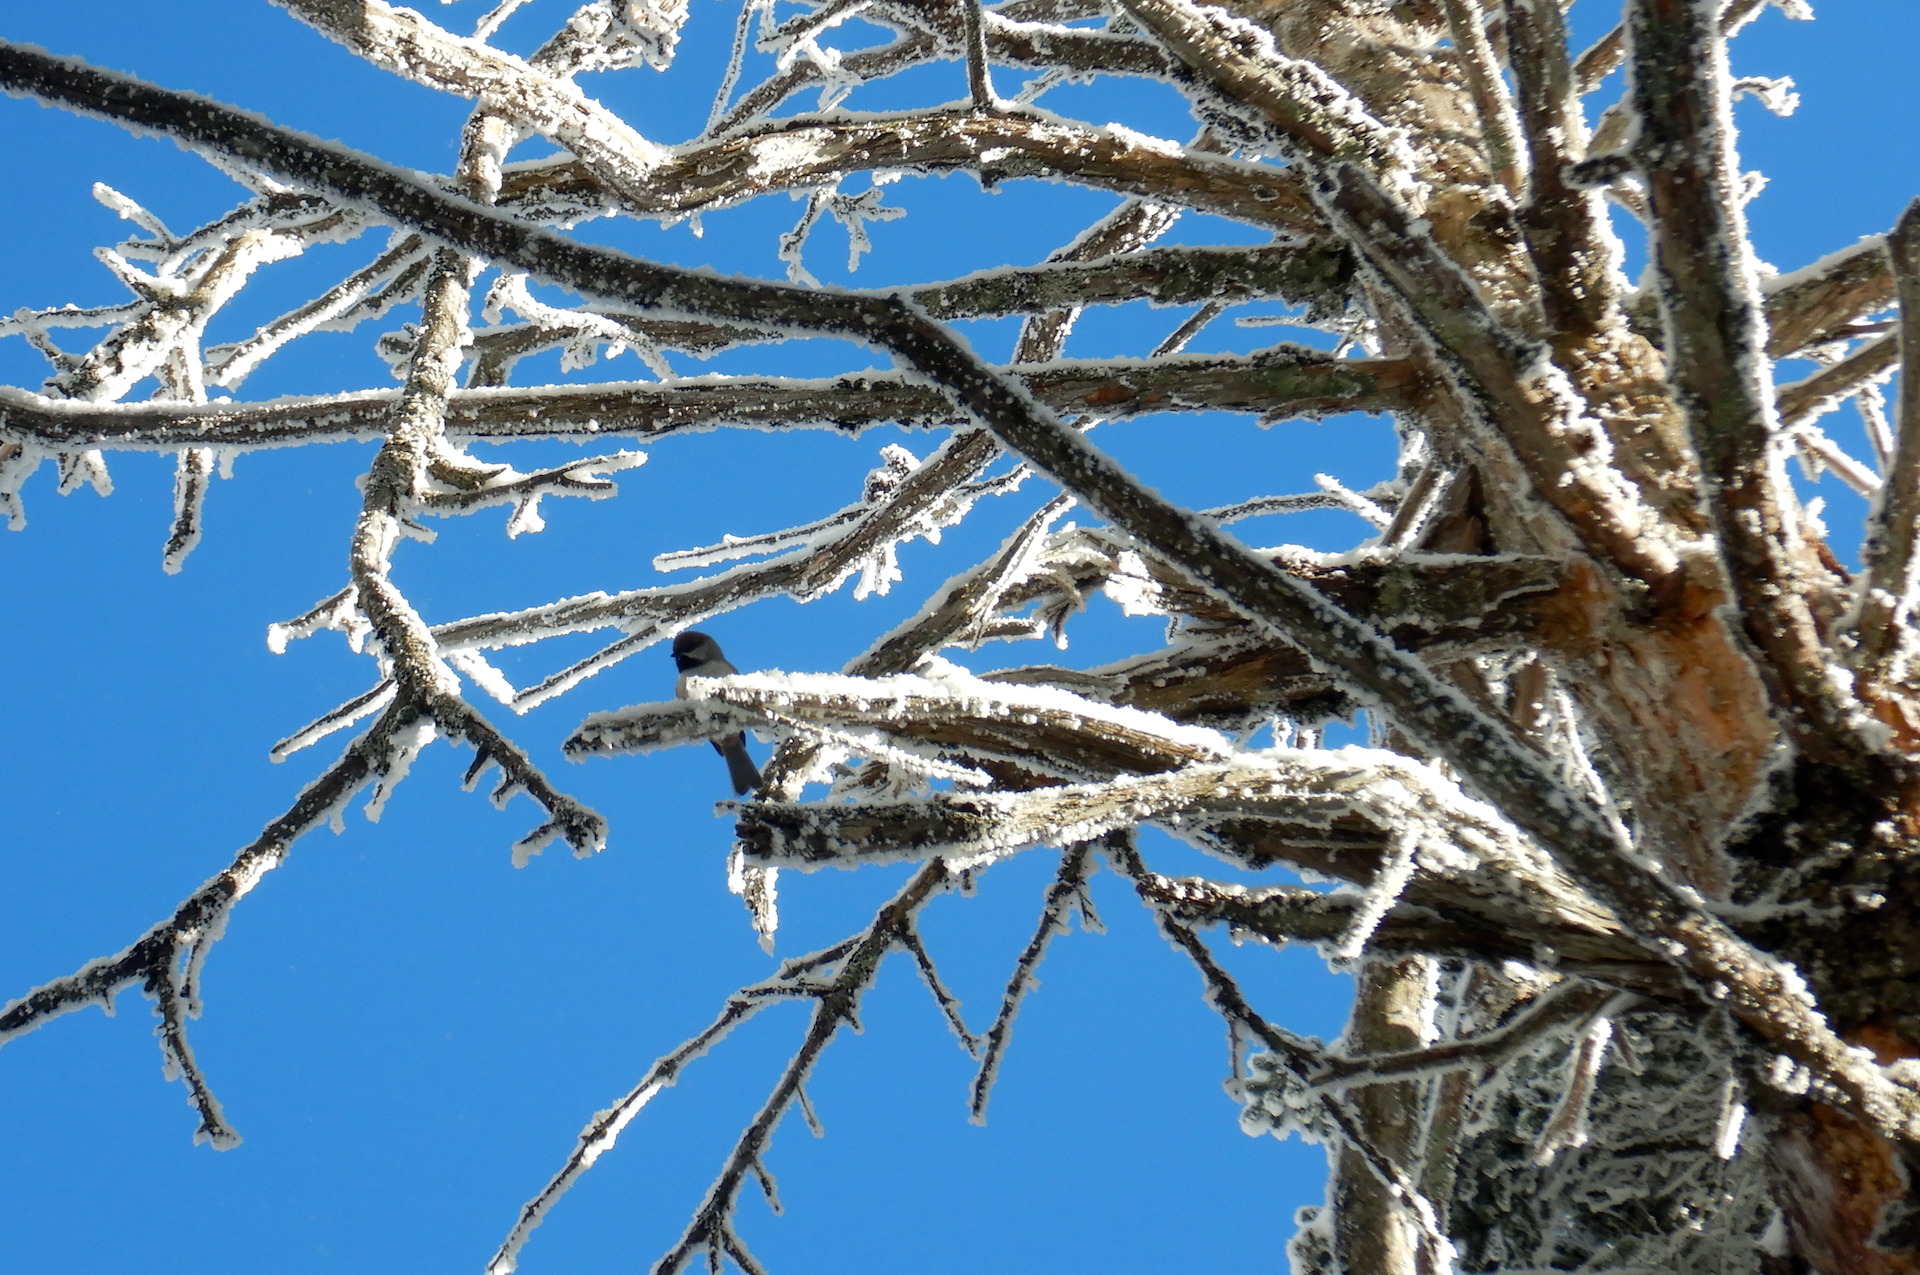 A boreal chickadee perches in a frost covered dead spruce tree. The bird is at left center. It has a brown cap with is diagnostic of boreal chickadees.